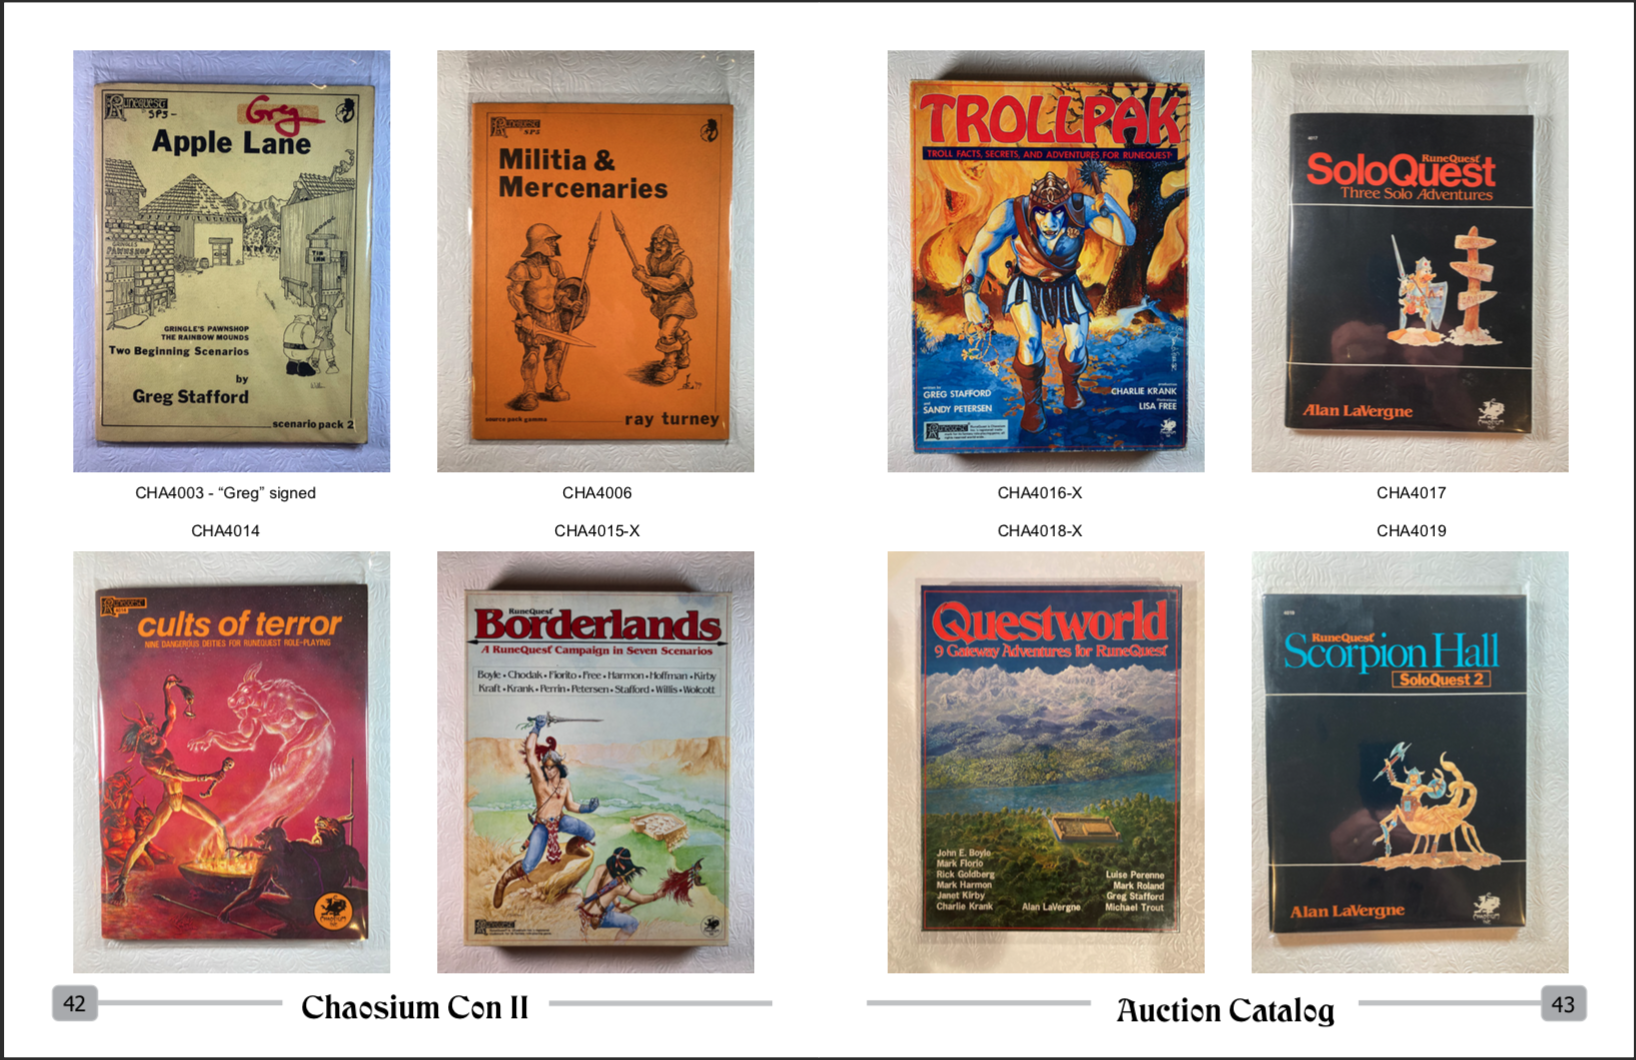 chaosium-con-ii-auction-4.png